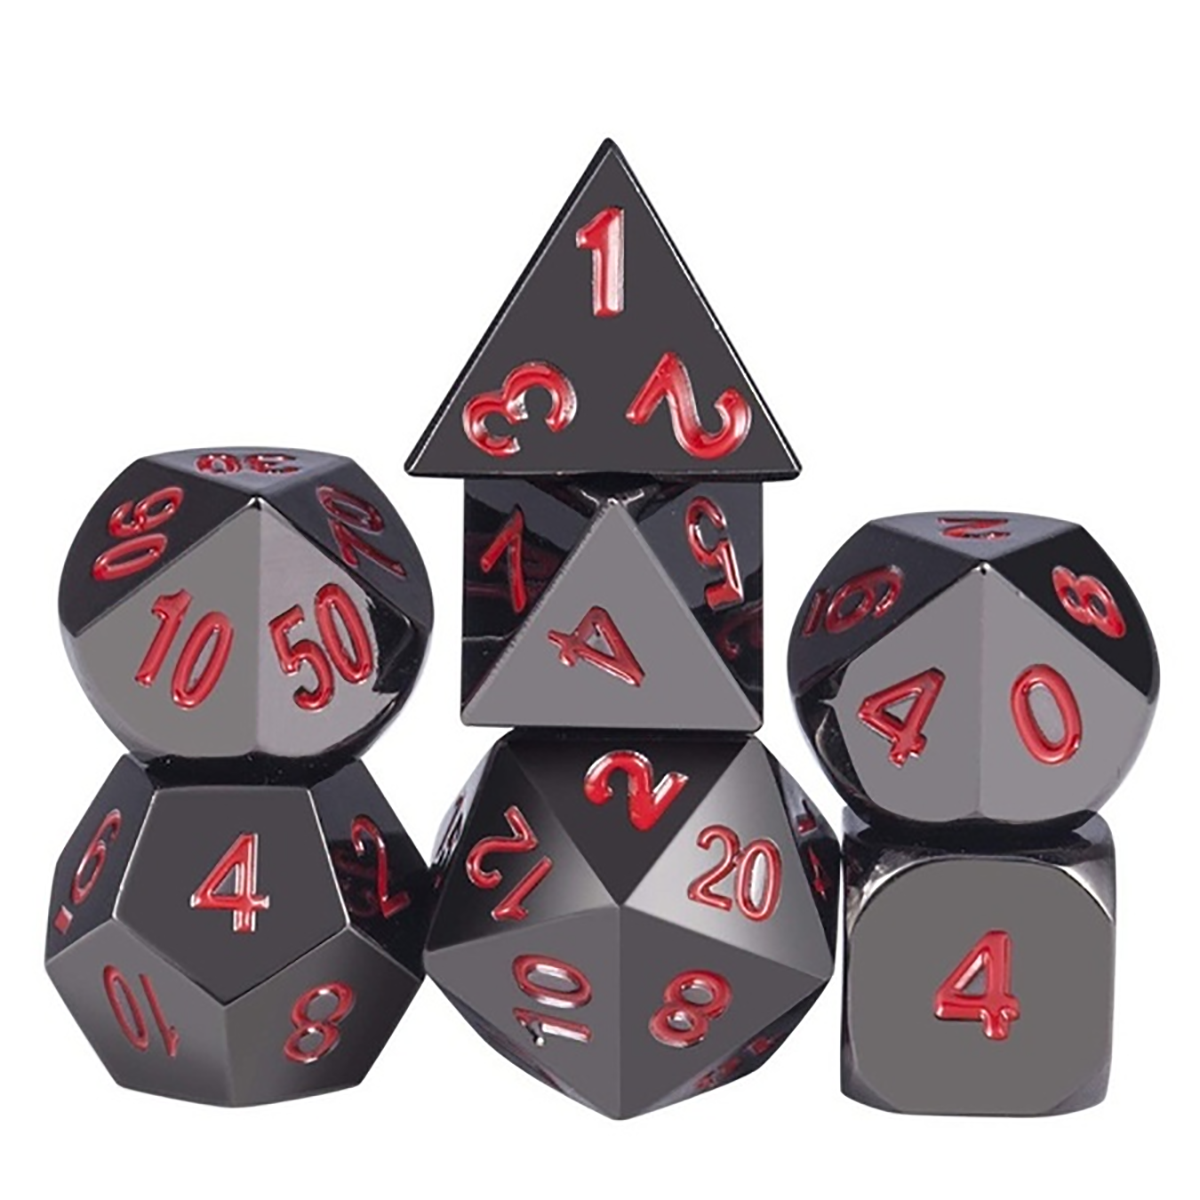 7-PcsSet-Metal-Dice-Set-Role-Playing-Dragons-Table-Game-With-Cloth-Bag-Bar-Party-Game-Dice-1677684-3